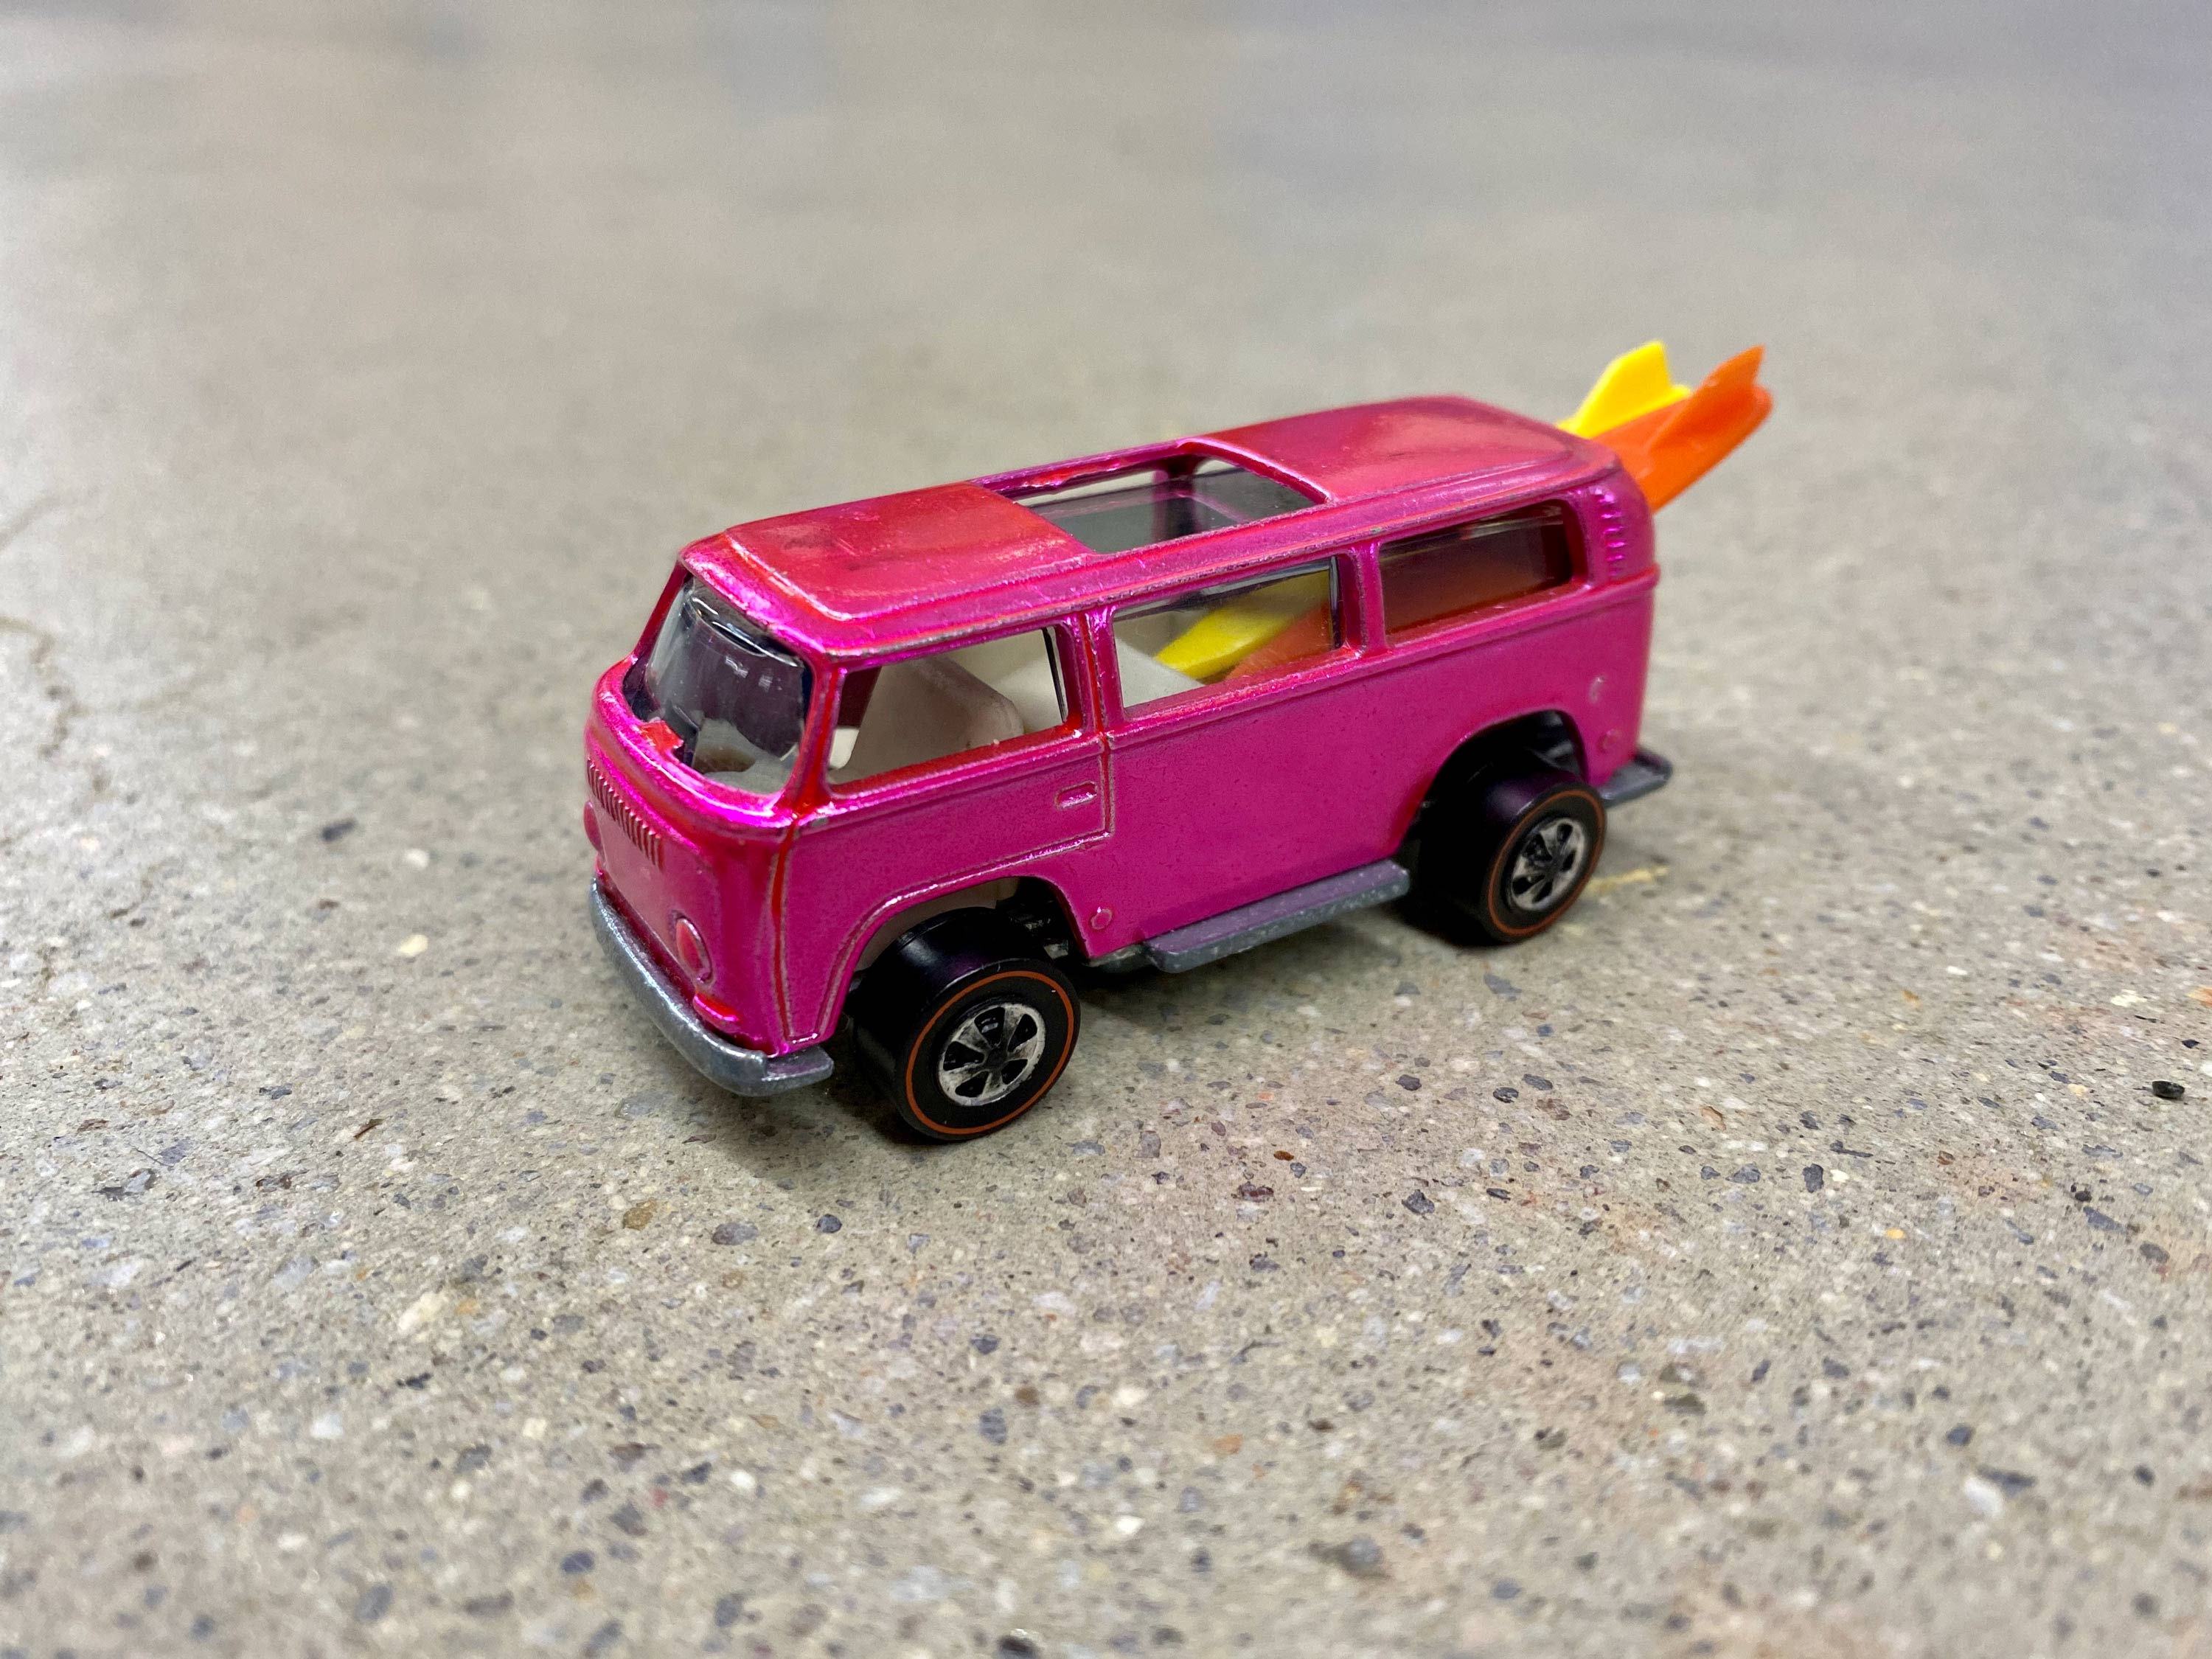 This might be the most valuable Hot Wheels car in the world Boston